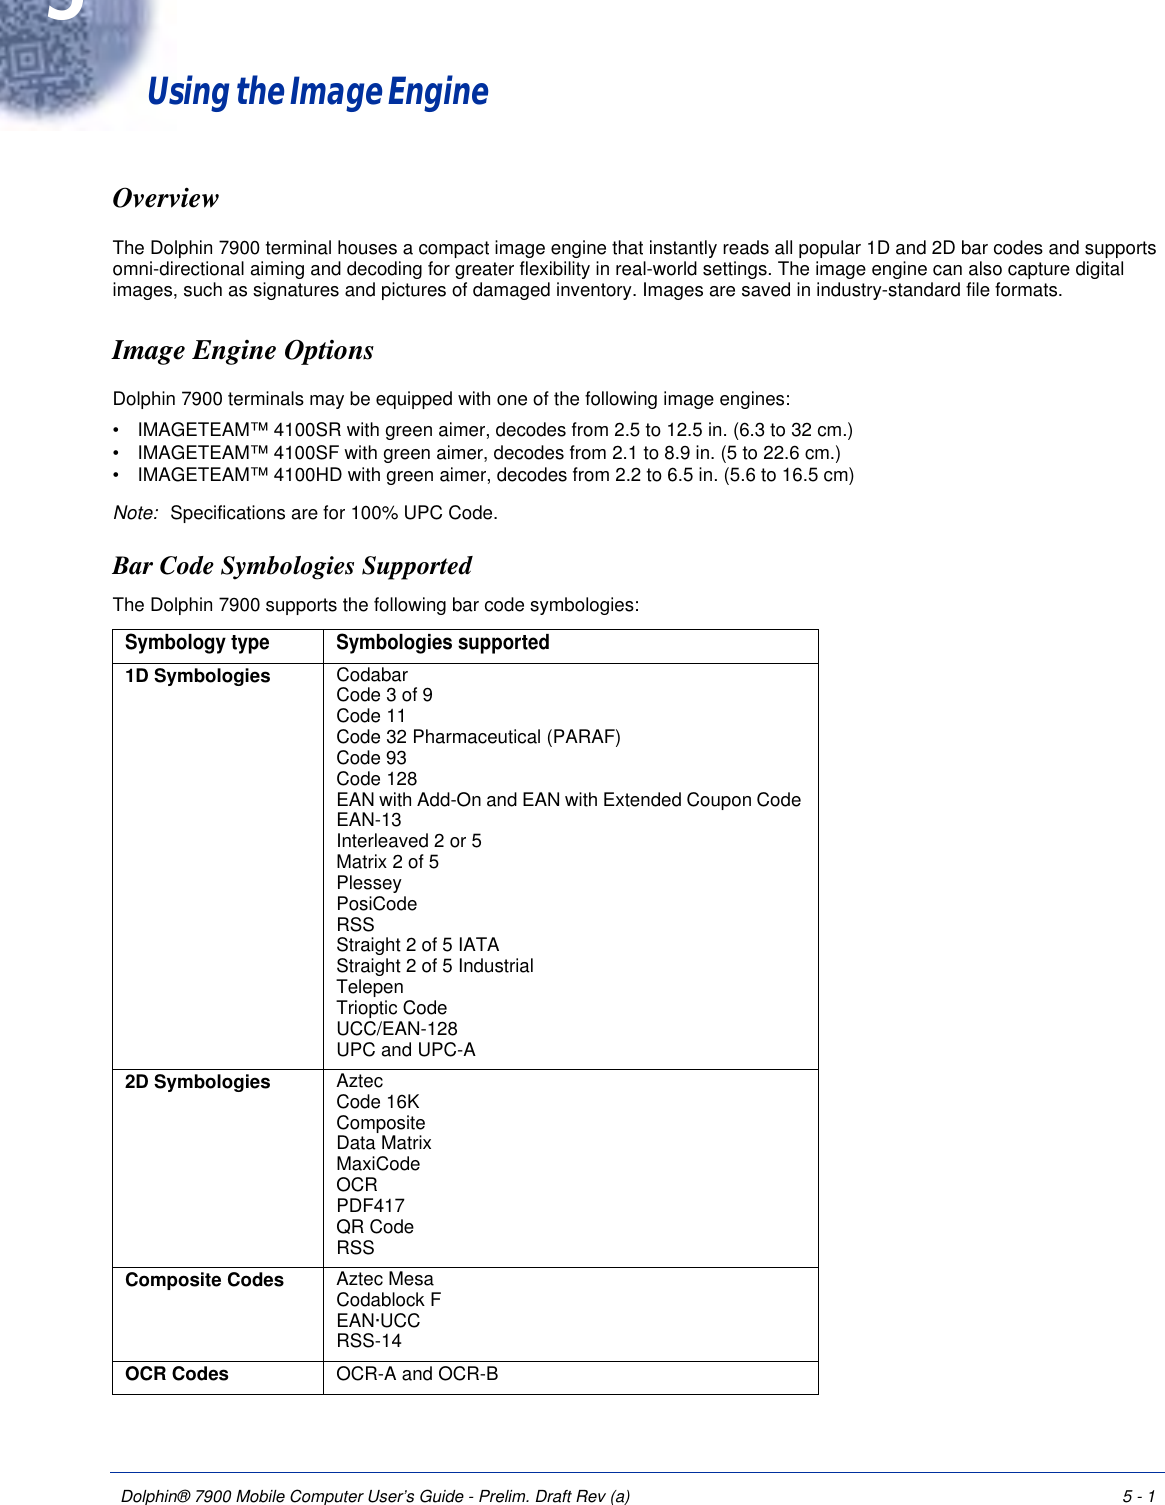 Dolphin® 7900 Mobile Computer User’s Guide - Prelim. Draft Rev (a) 5 - 1Using the Image EngineOverviewThe Dolphin 7900 terminal houses a compact image engine that instantly reads all popular 1D and 2D bar codes and supports omni-directional aiming and decoding for greater flexibility in real-world settings. The image engine can also capture digital images, such as signatures and pictures of damaged inventory. Images are saved in industry-standard file formats.Image Engine Options Dolphin 7900 terminals may be equipped with one of the following image engines: •           IMAGETEAM™ 4100SR with green aimer, decodes from 2.5 to 12.5 in. (6.3 to 32 cm.) •           IMAGETEAM™ 4100SF with green aimer, decodes from 2.1 to 8.9 in. (5 to 22.6 cm.) •           IMAGETEAM™ 4100HD with green aimer, decodes from 2.2 to 6.5 in. (5.6 to 16.5 cm) Note: Specifications are for 100% UPC Code.Bar Code Symbologies SupportedThe Dolphin 7900 supports the following bar code symbologies: Symbology type Symbologies supported1D Symbologies Codabar  Code 3 of 9 Code 11 Code 32 Pharmaceutical (PARAF)  Code 93  Code 128  EAN with Add-On and EAN with Extended Coupon Code  EAN-13  Interleaved 2 or 5  Matrix 2 of 5  Plessey  PosiCode RSS  Straight 2 of 5 IATA Straight 2 of 5 Industrial Telepen  Trioptic Code UCC/EAN-128 UPC and UPC-A2D Symbologies  Aztec Code 16K Composite Data Matrix MaxiCode OCR PDF417 QR Code RSS Composite Codes  Aztec Mesa Codablock F EAN·UCC RSS-14OCR Codes OCR-A and OCR-B5